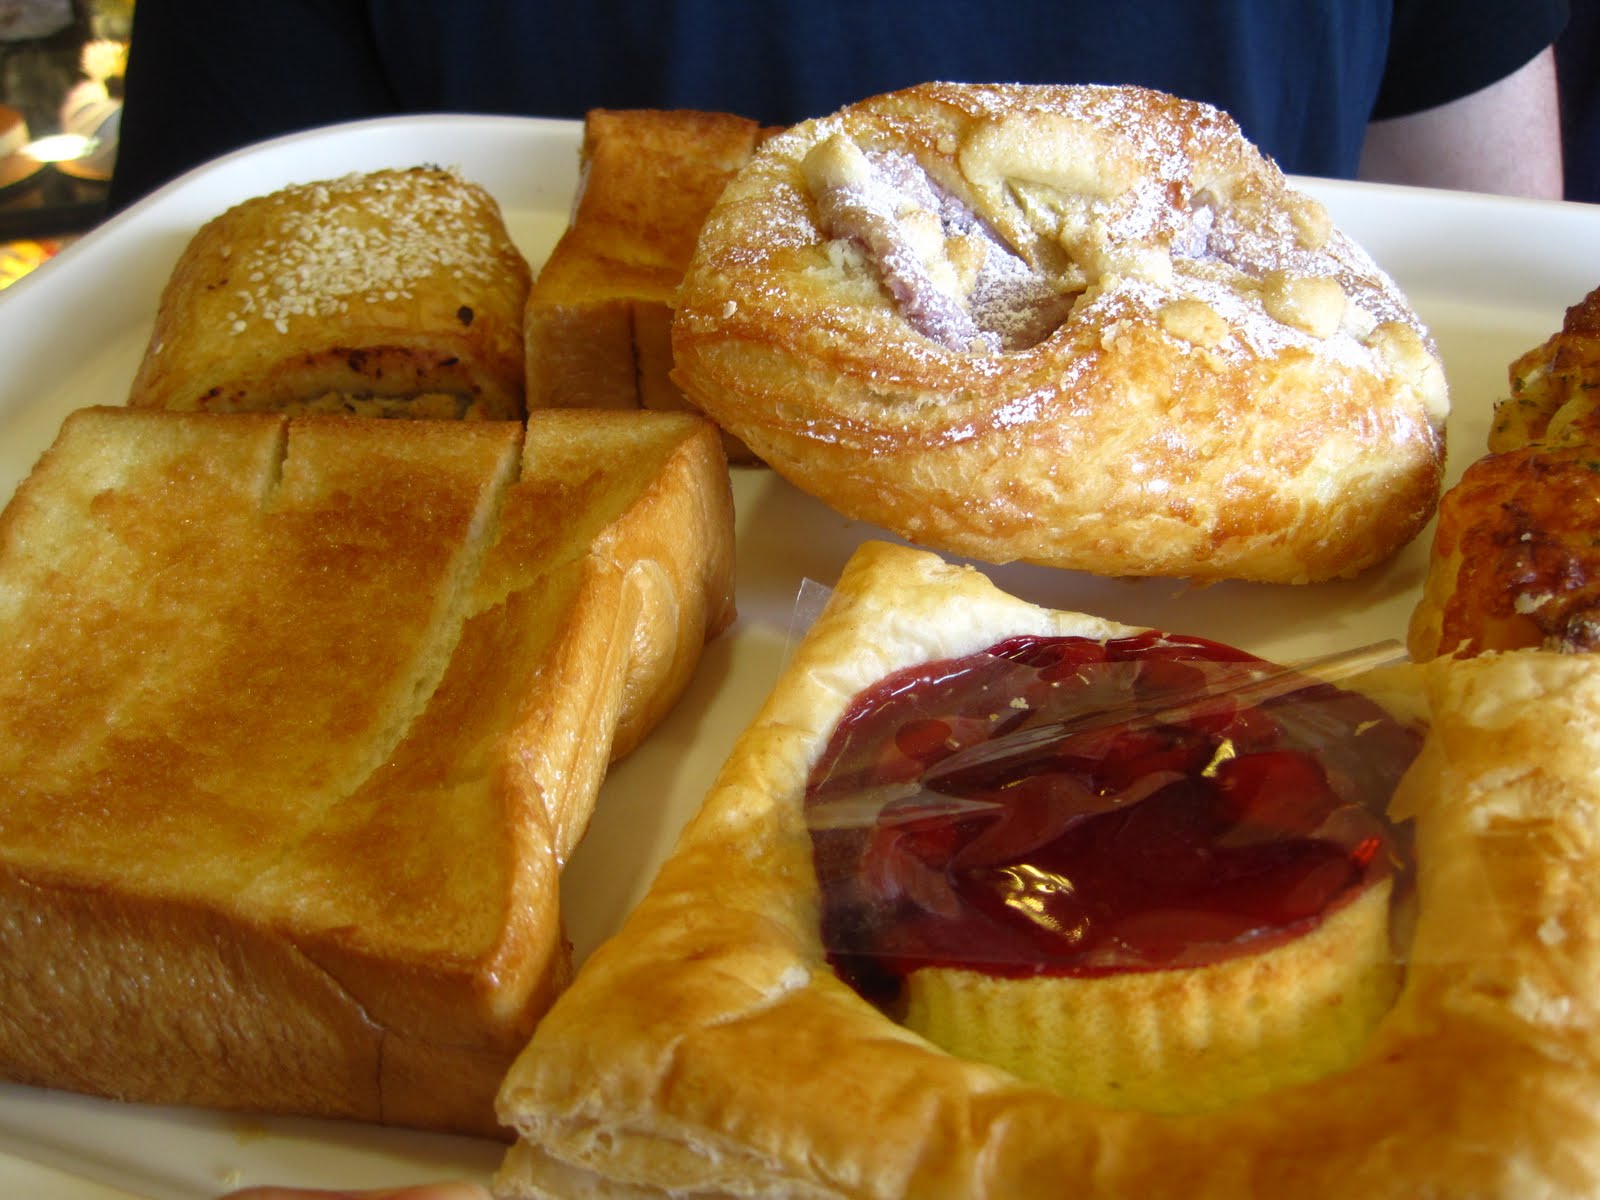 10. Taiwanese Puff Pastry bread